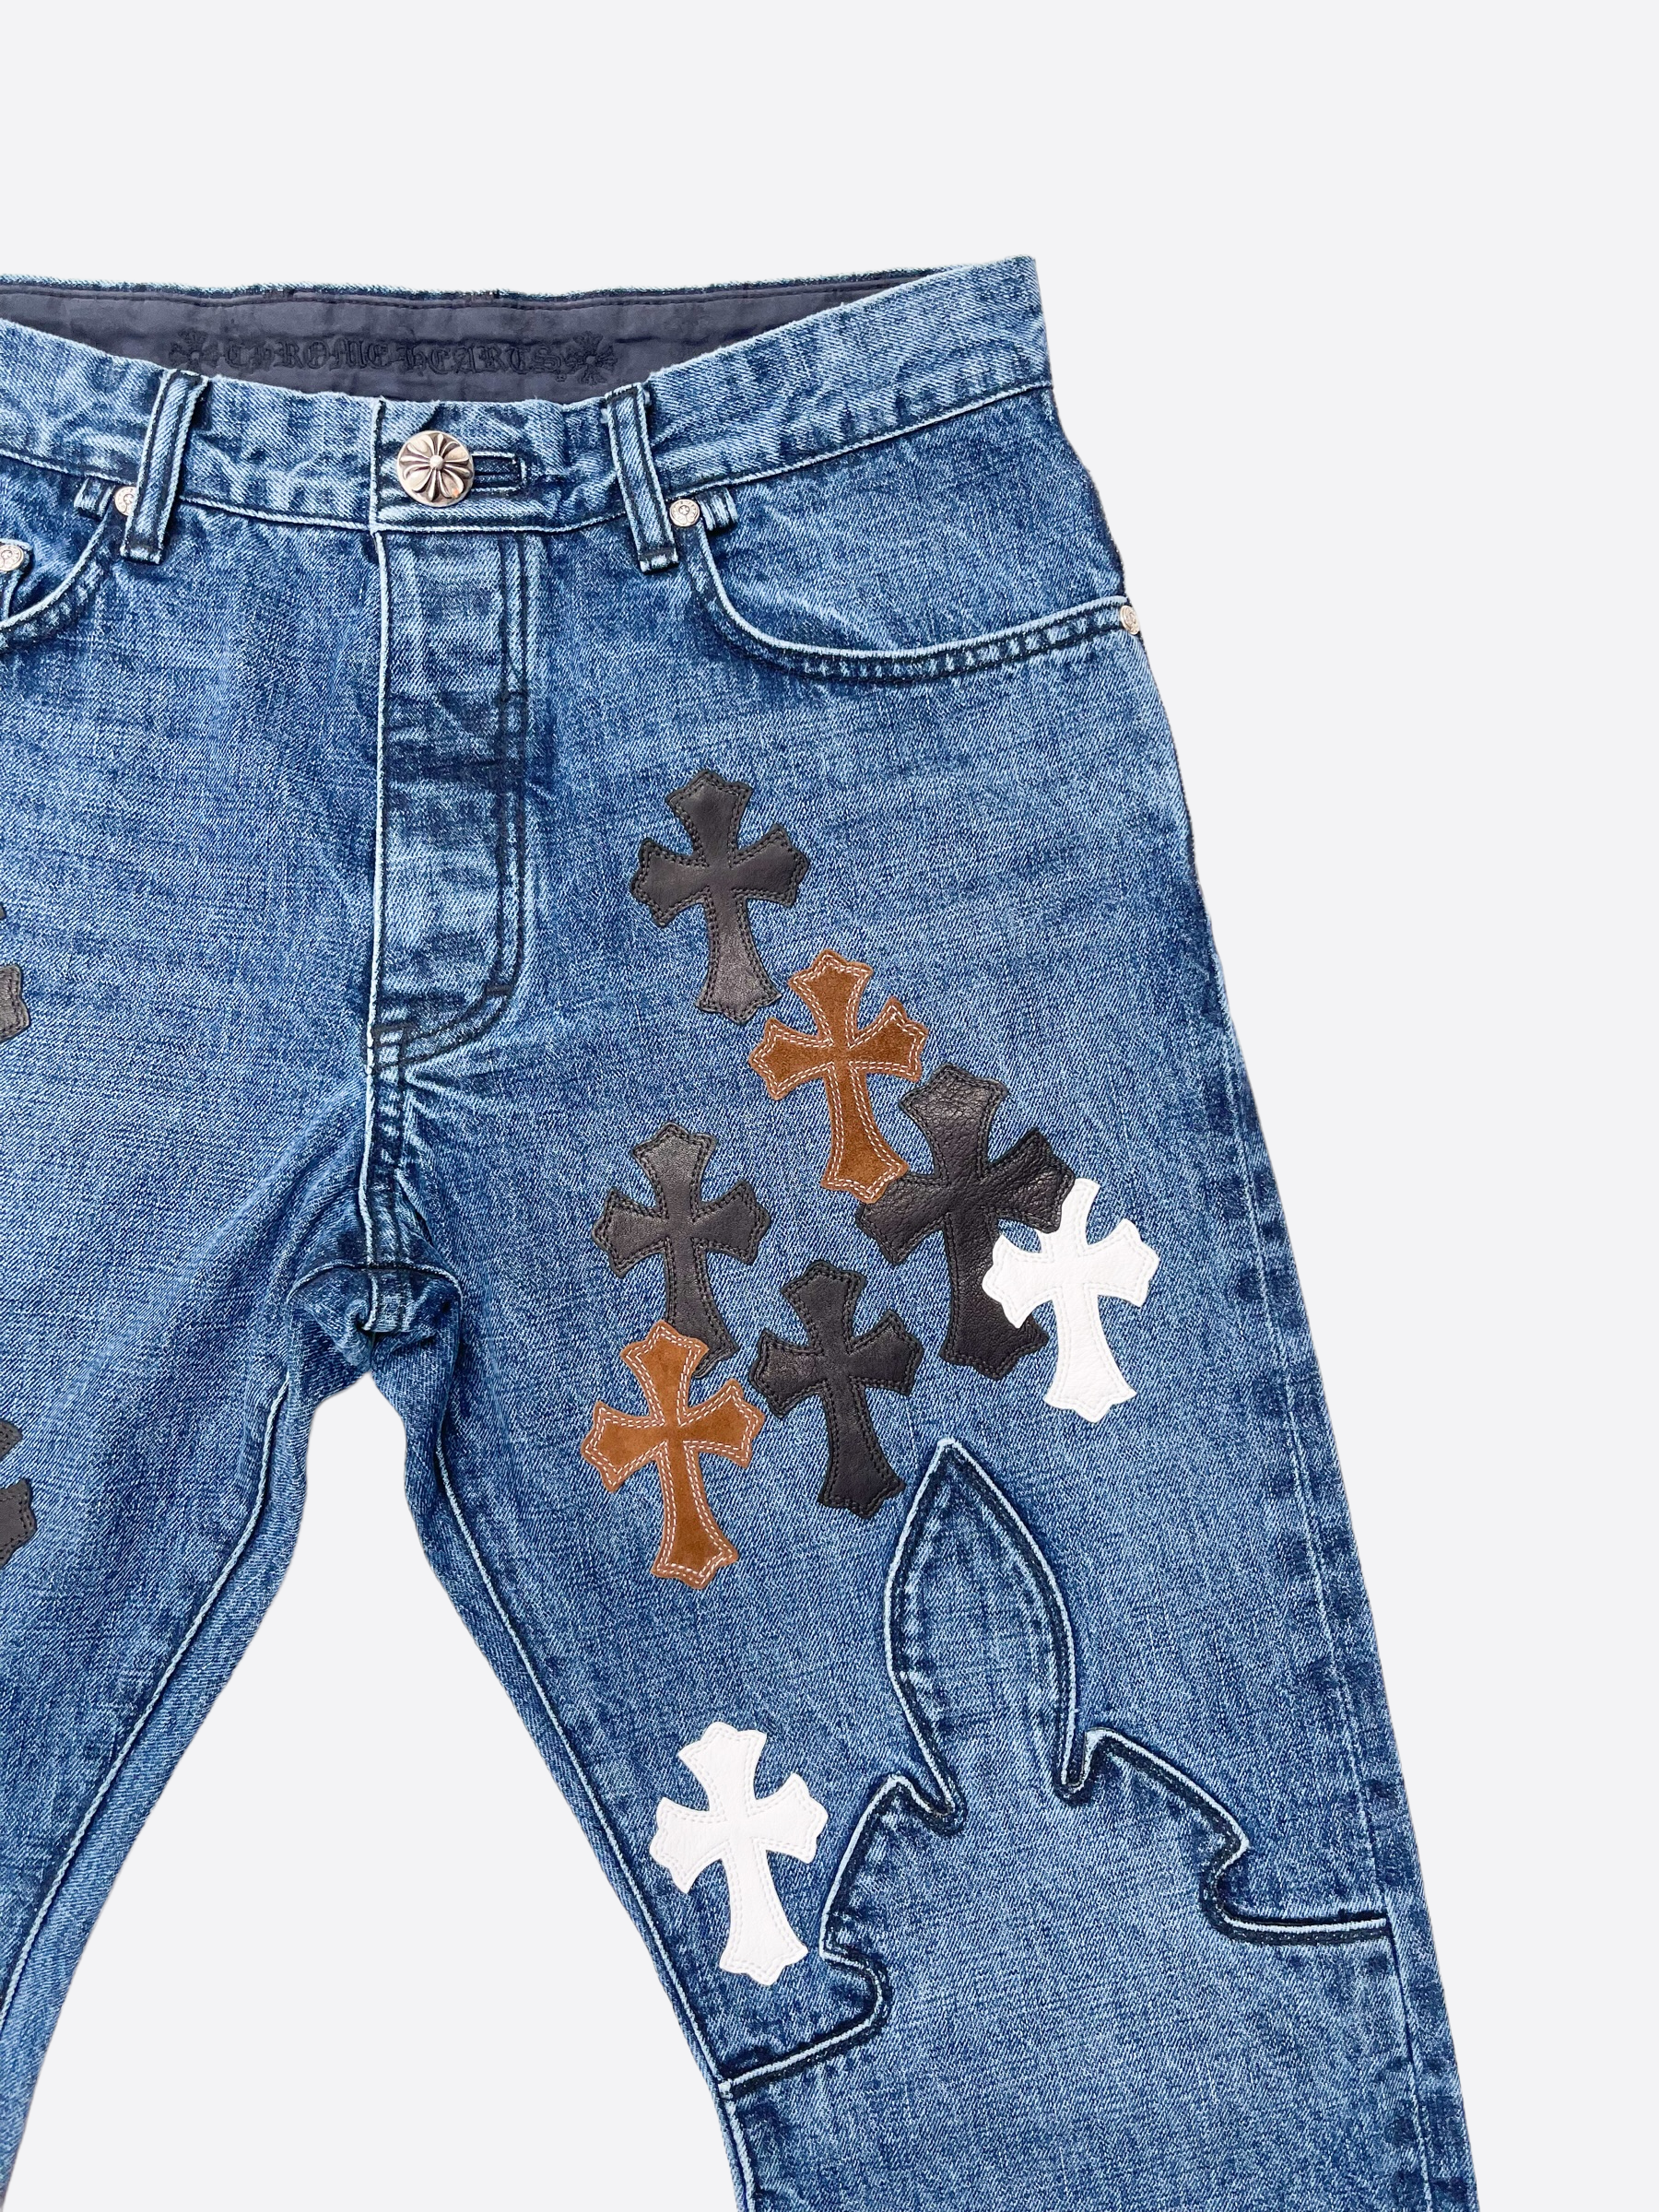 Checkered Cross Patch Fleur-Knee Jeans w/ 34 Cross Patches